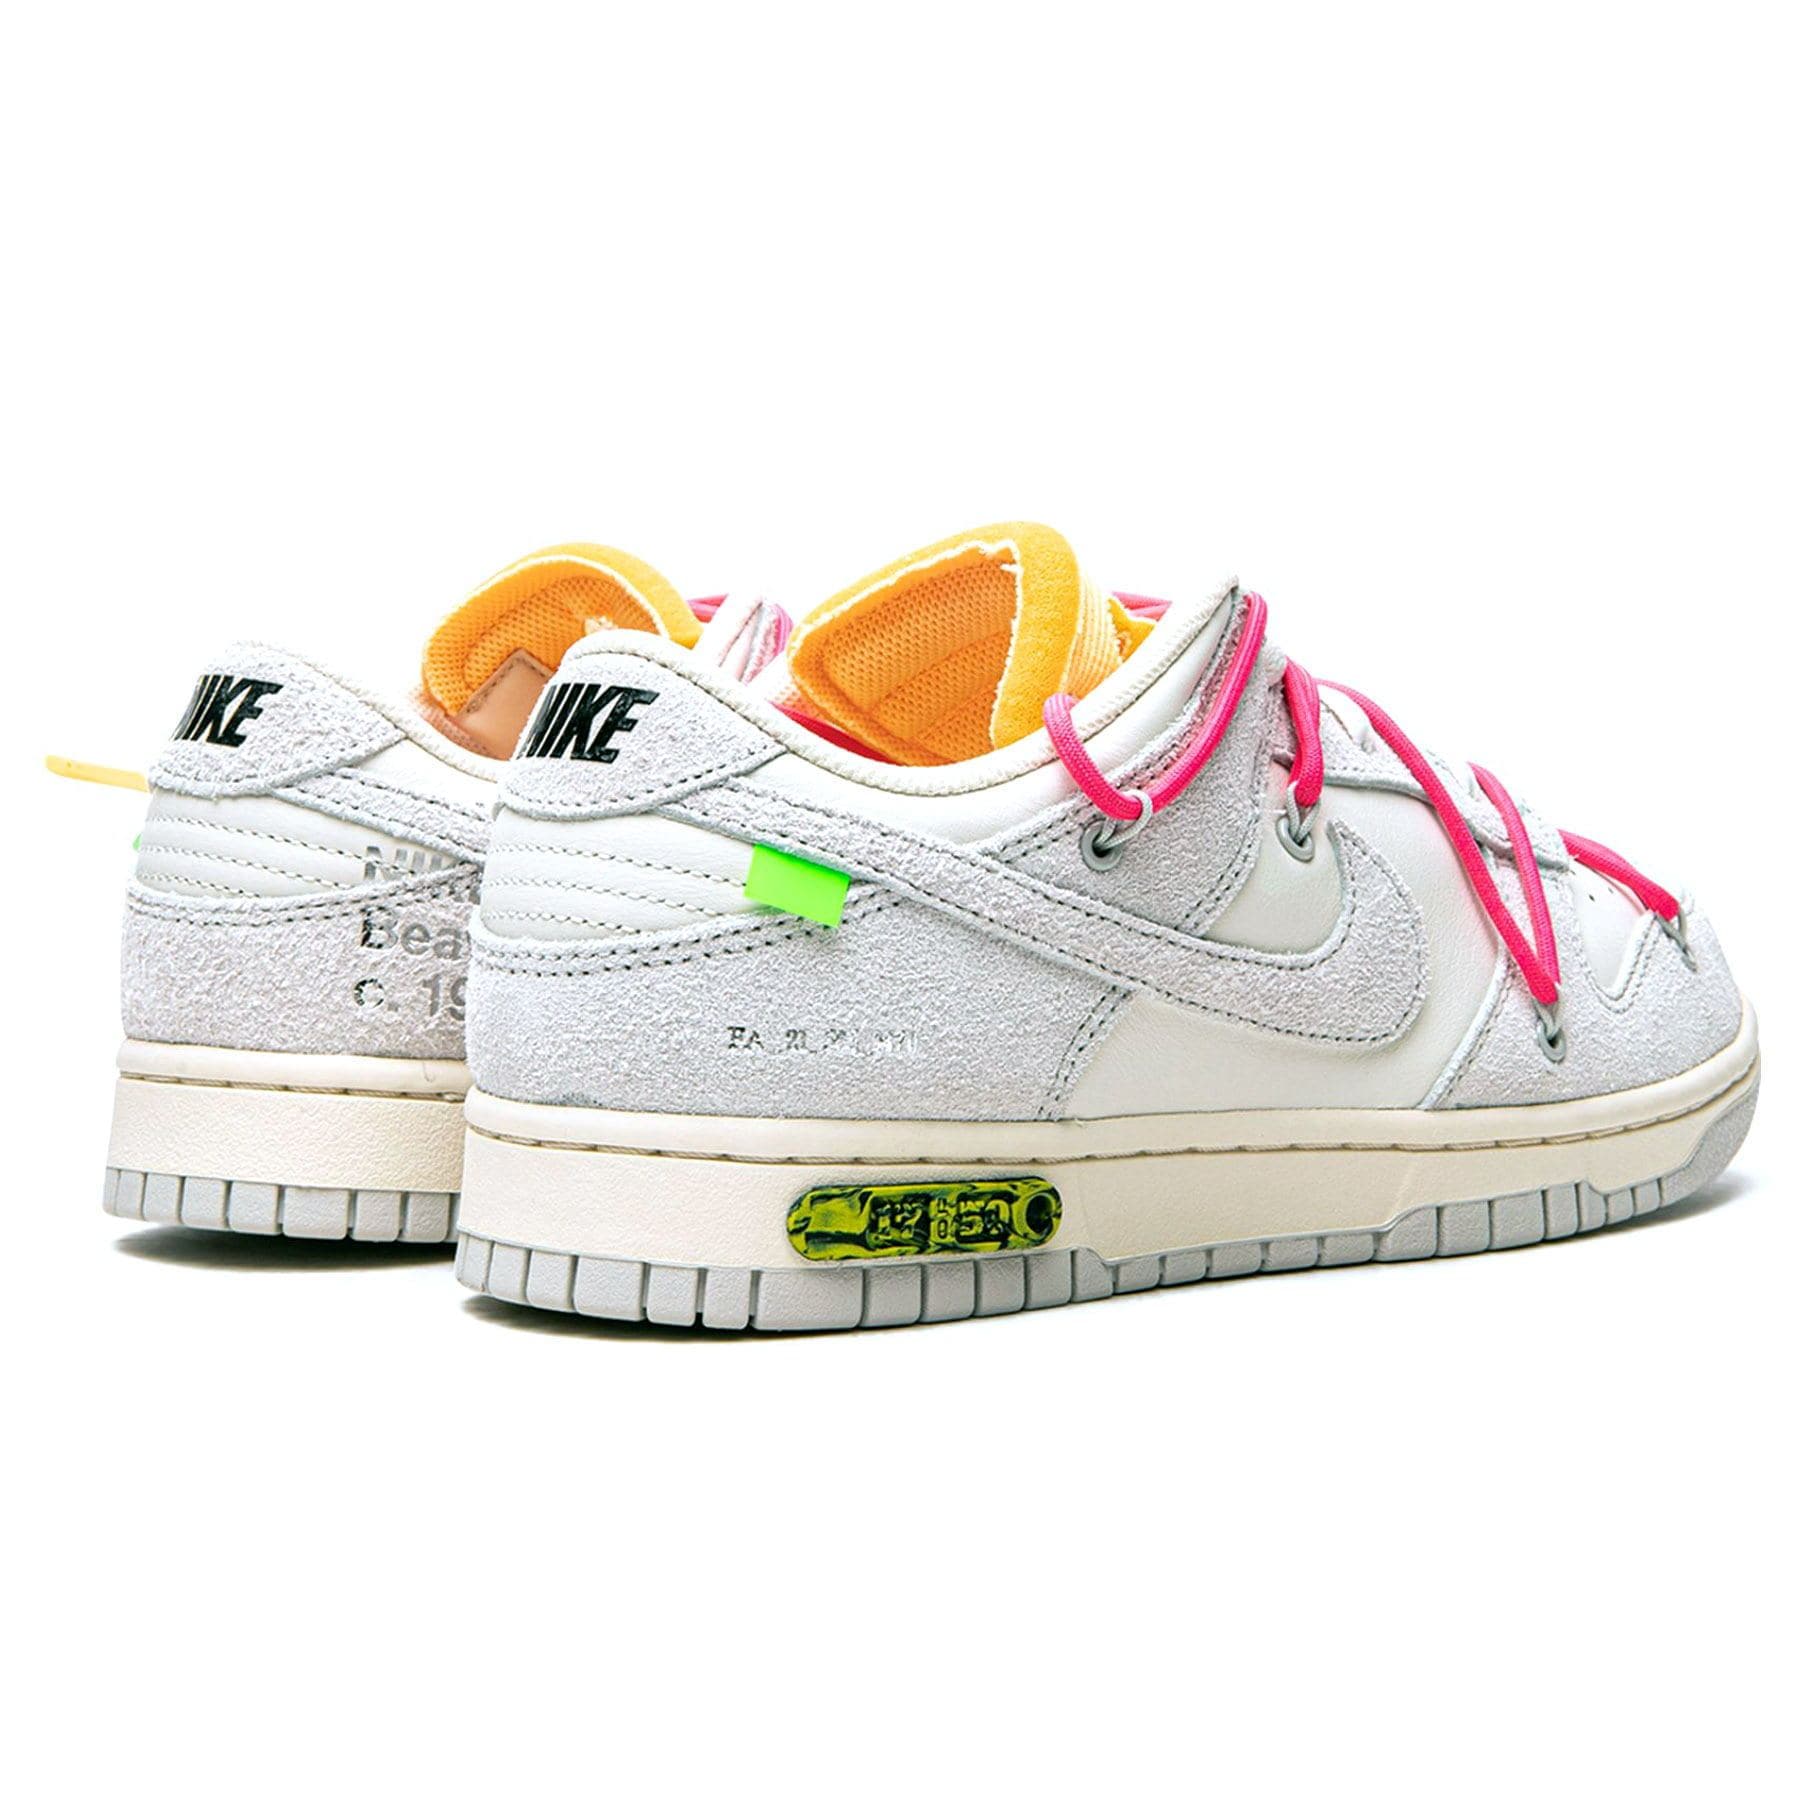 NIKE ダンク Low off-white LOT17 27.5 US9.5